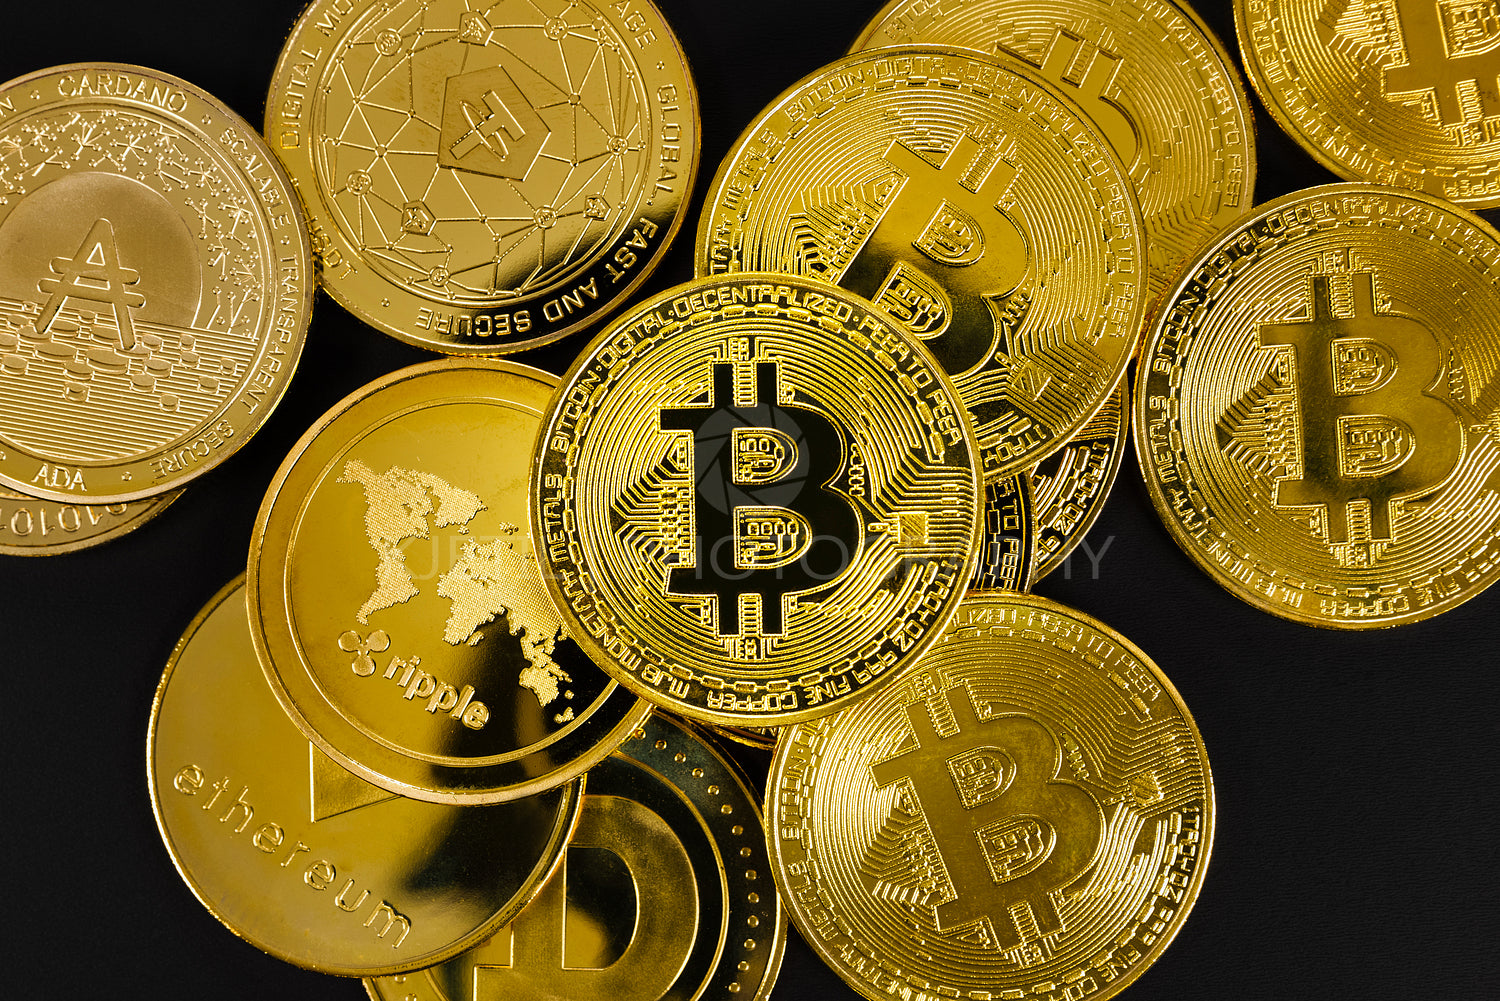 Close-up of Bitcoin coin on top of various golden cryptocurrencies